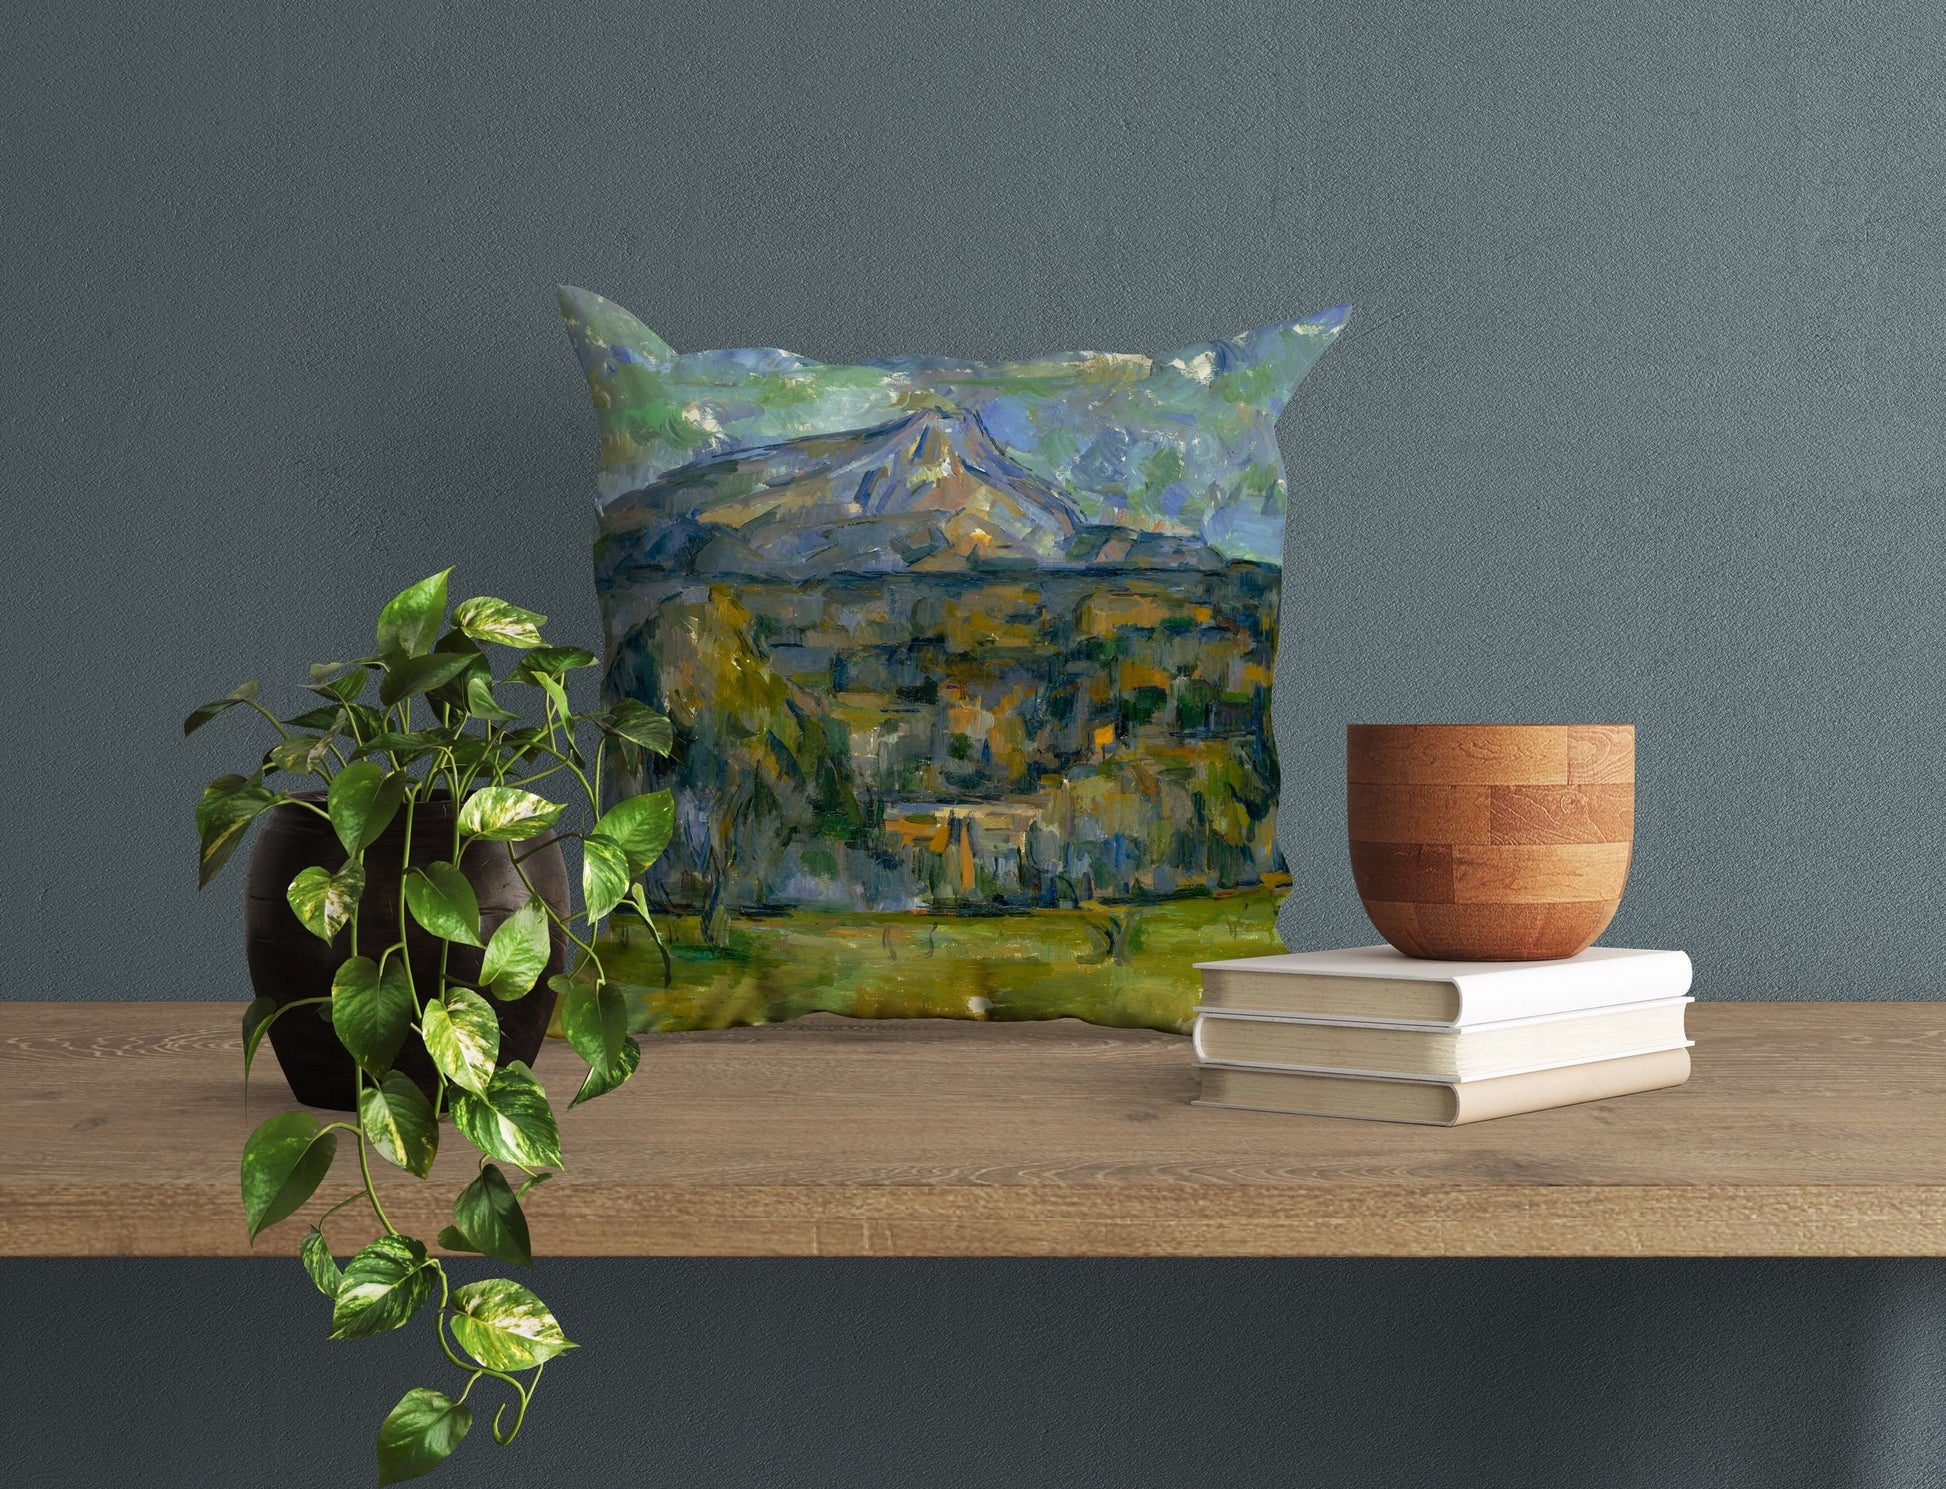 Paul Cezanne Famous Painting, Toss Pillow, Abstract Throw Pillow, Soft Pillow Cases, Farmhouse Pillow, Indoor Pillow Cases